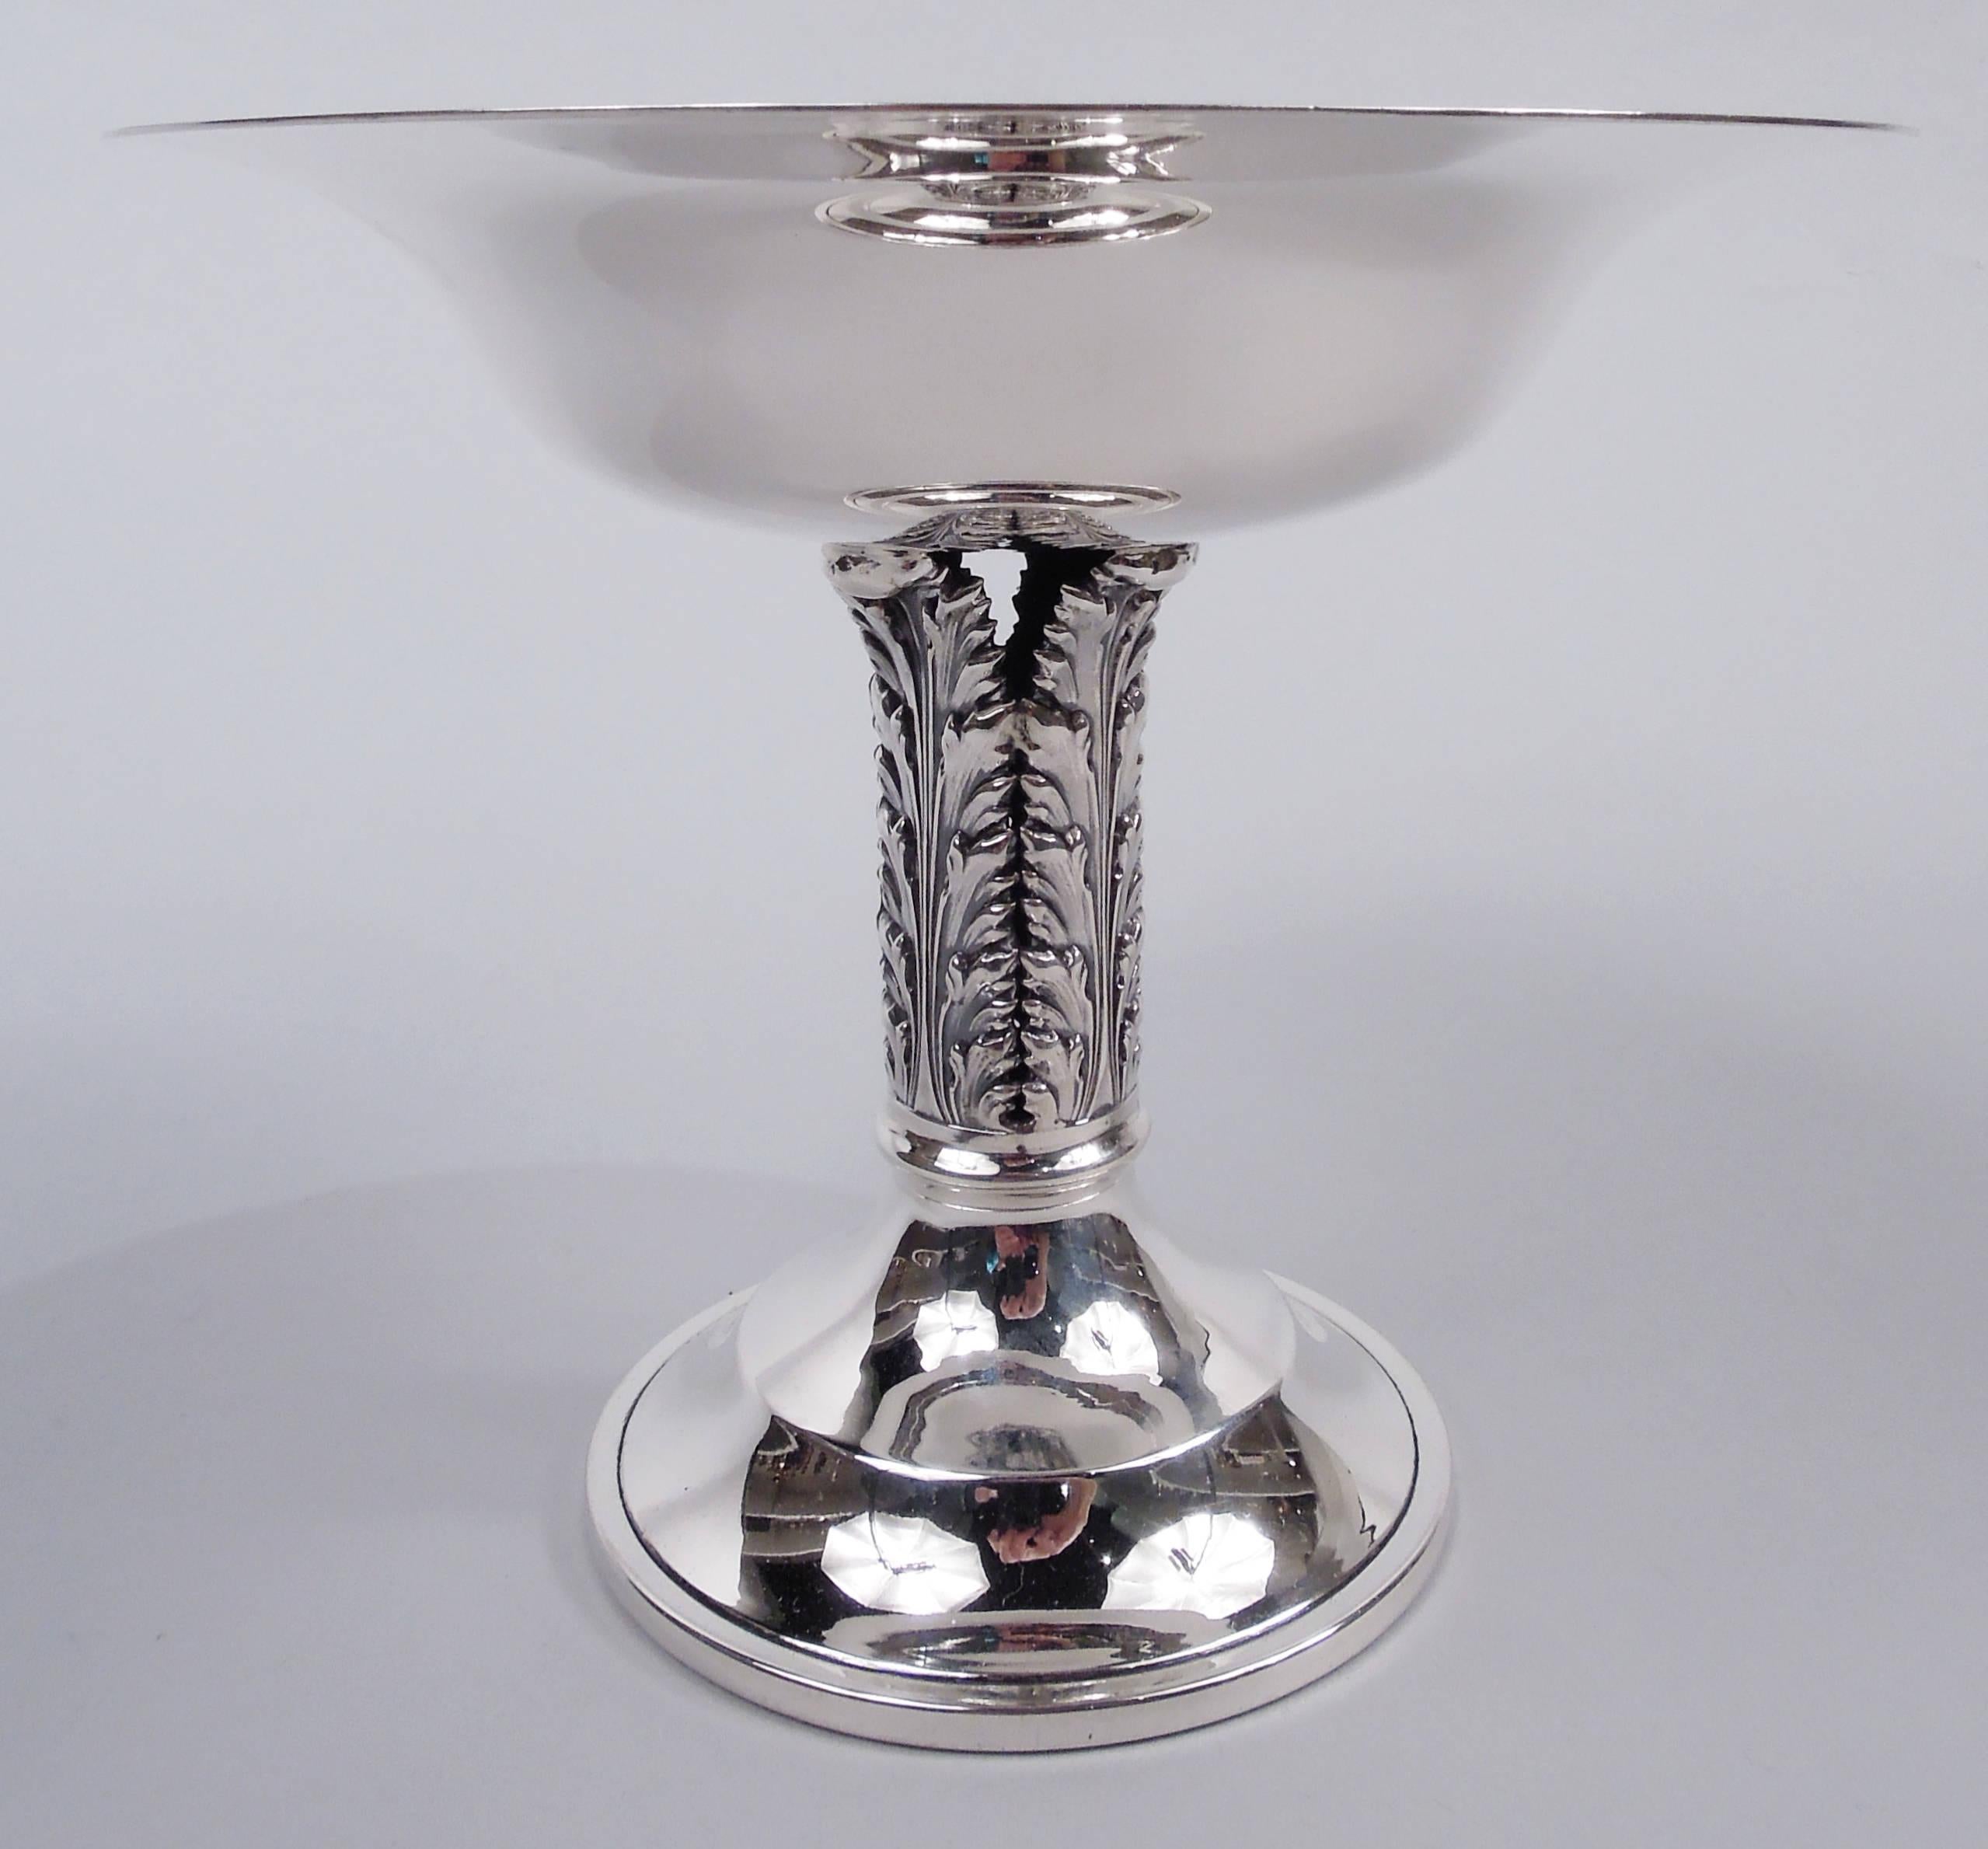 American Midcentury Modern sterling silver compote. Round bowl with wide and flat rim and domed foot. Support in form of four cast vertical acanthus leaves. A stylish Danish-influenced design by an unknown maker. Marked “Sterling” with initials RF